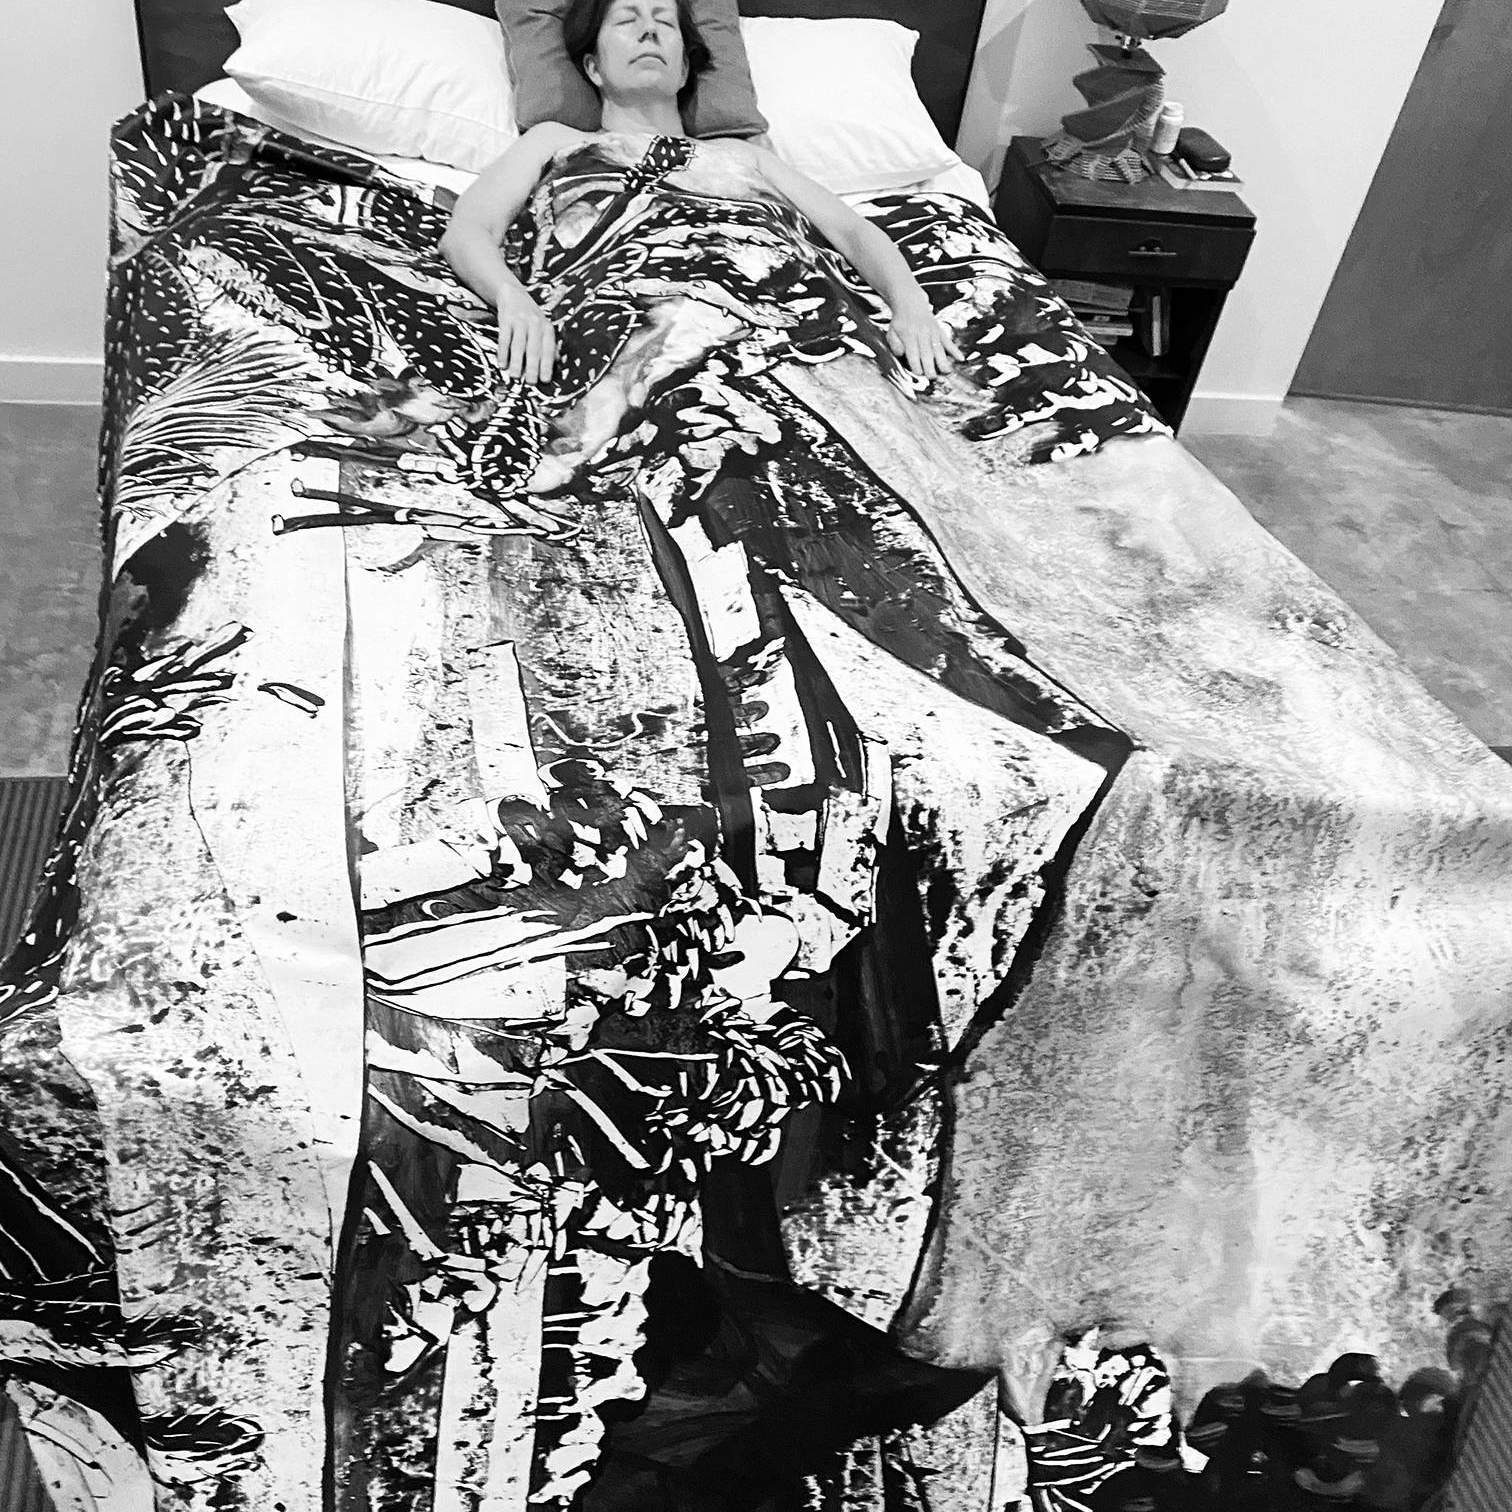 artist laying in bed with painted bed spread